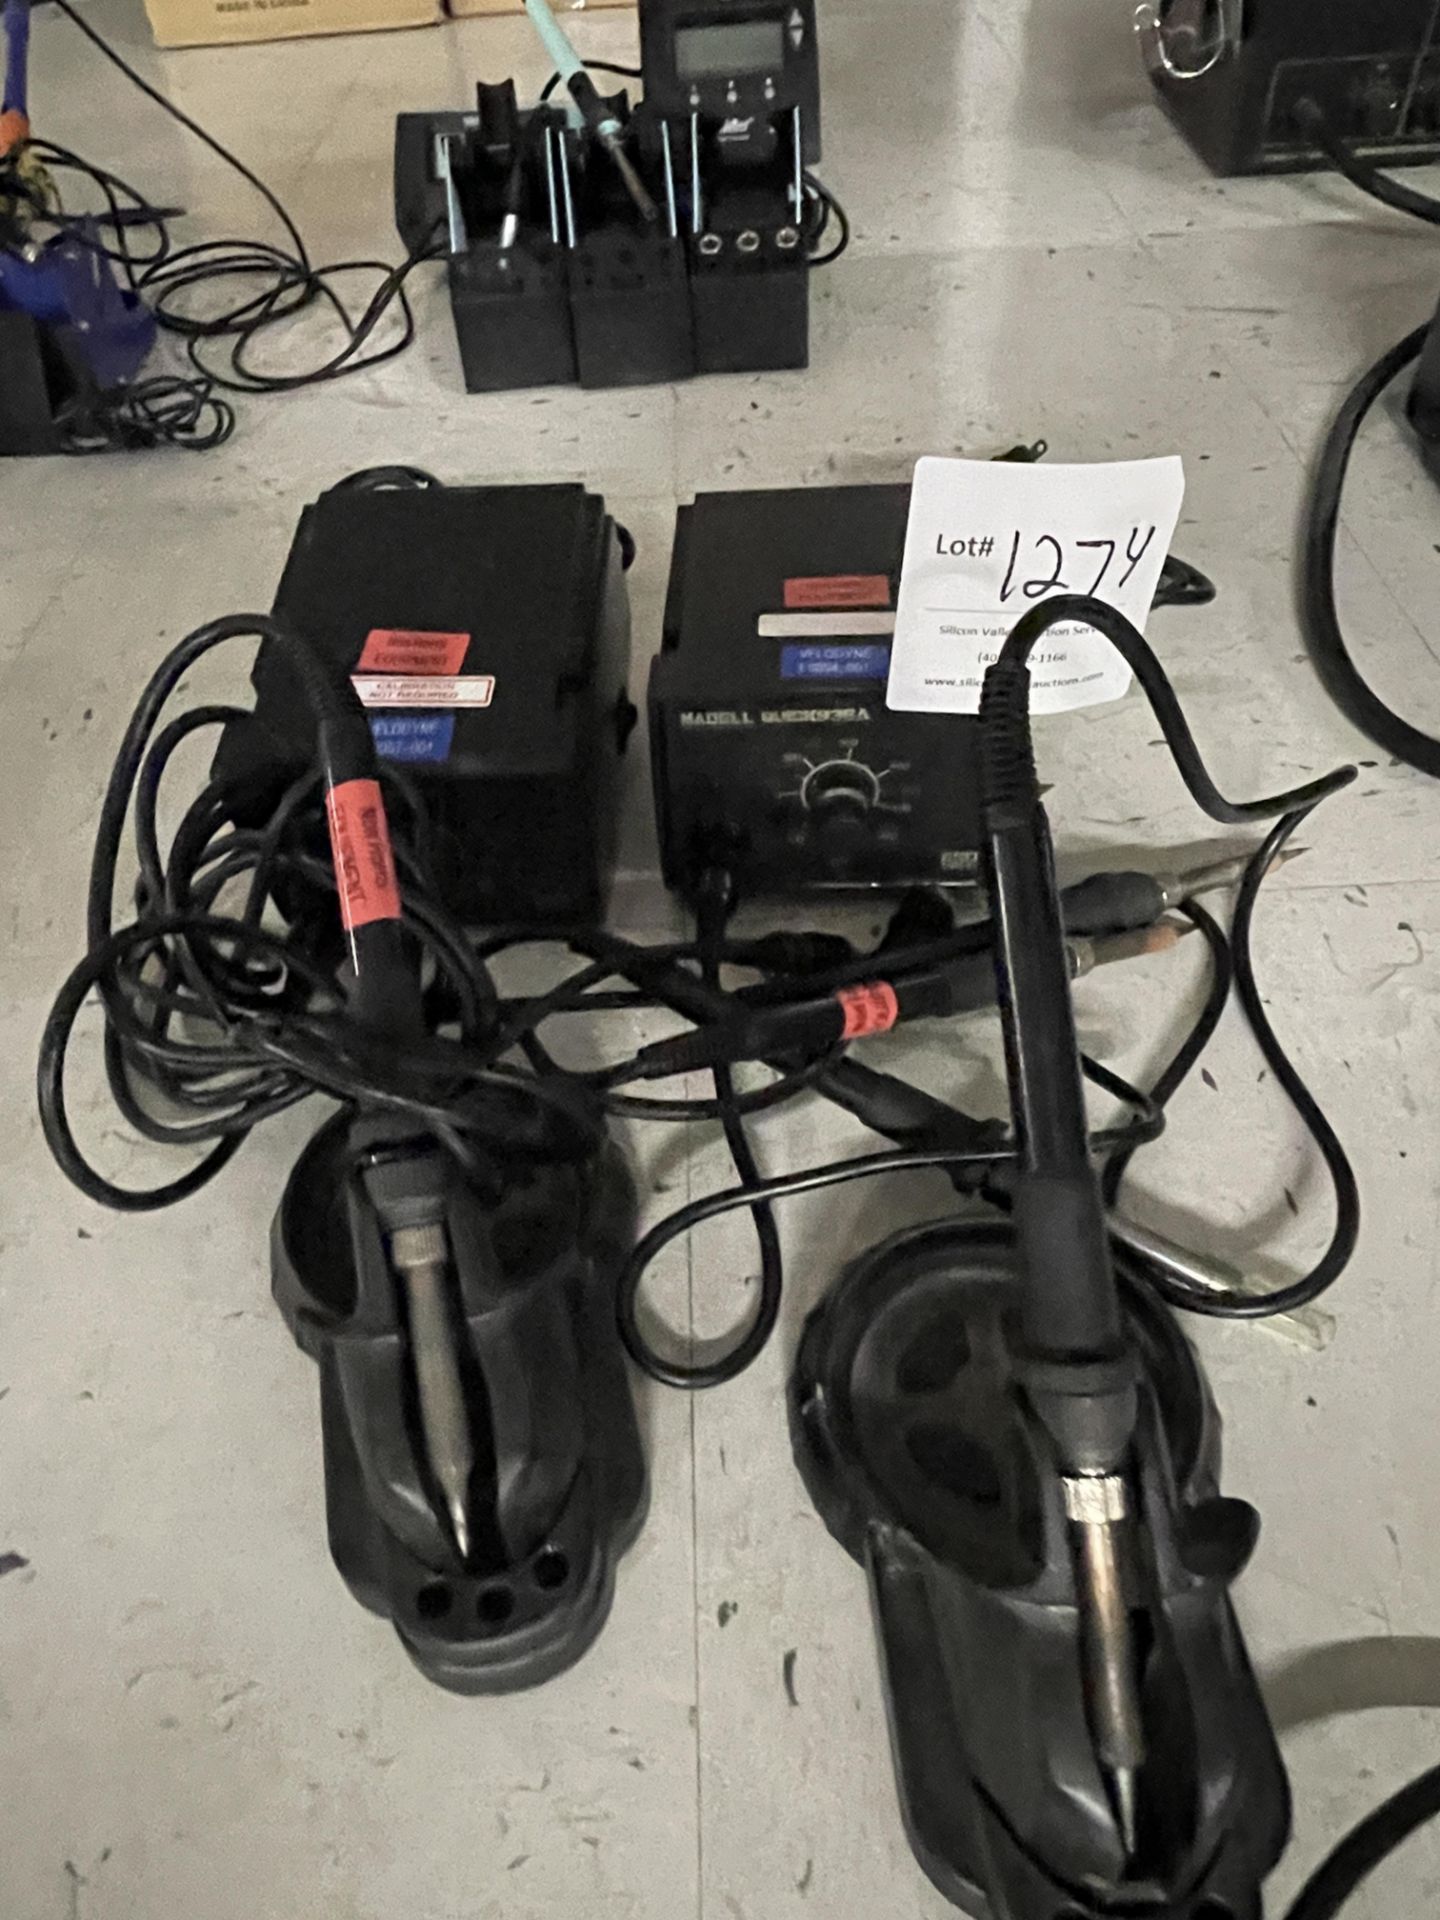 Madell Soldering Station AMTmax 936A